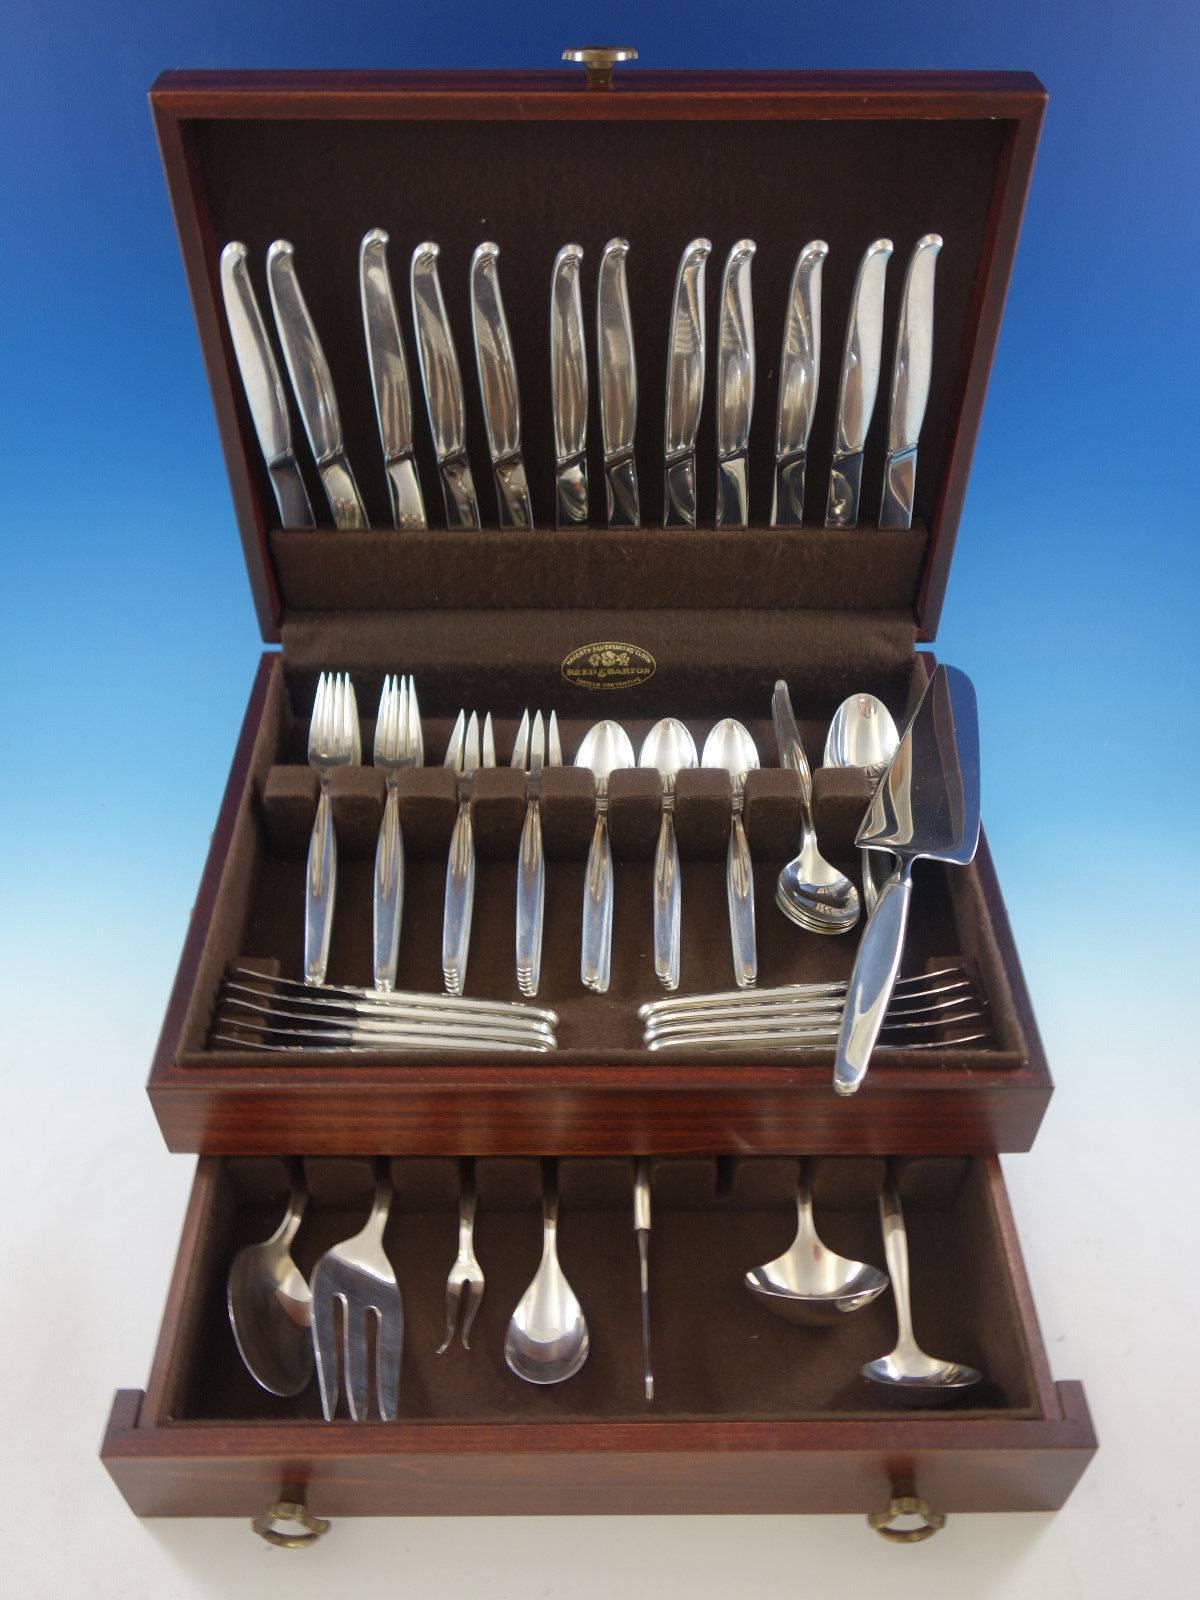 Contour by Towle Mid-Century Modern sterling silver flatware set, 80 pieces. The knives in this pattern are especially unique with unusual blades set on an angle. This set includes: 

12 knives, 8 3/4